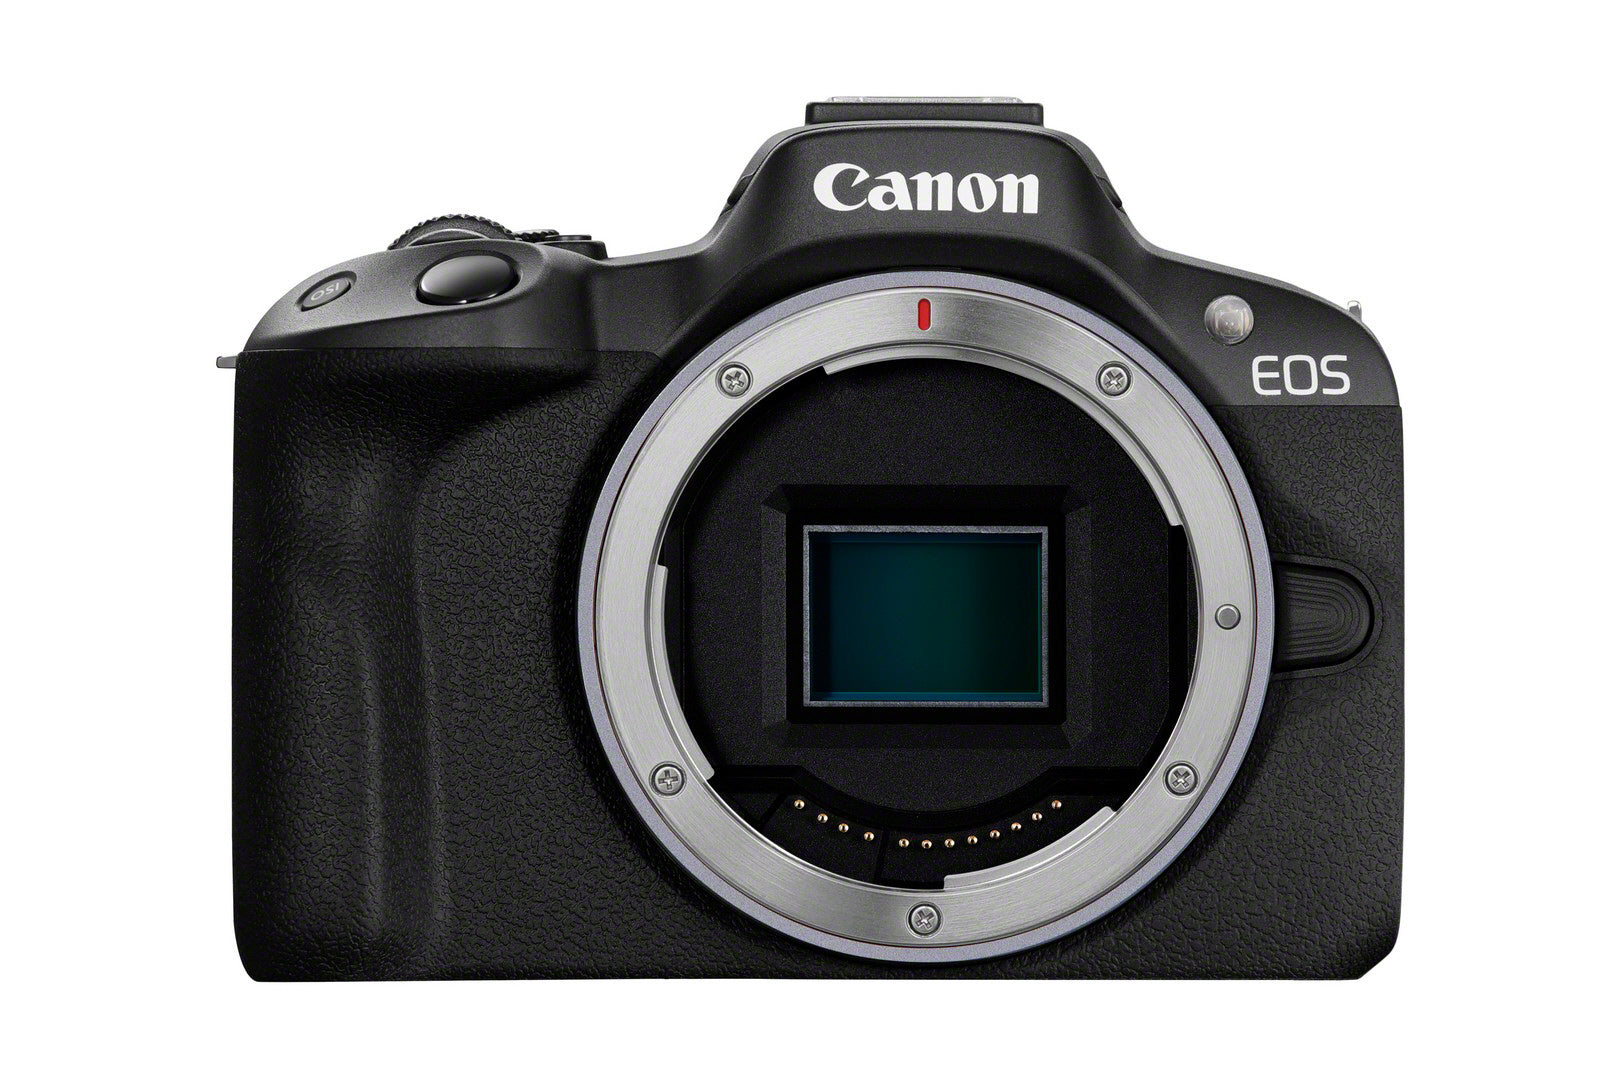 Canon EOS R50 Mirrorless APS-C Body Only - Product Photo 1 - Front view of the camera body with internal components visible